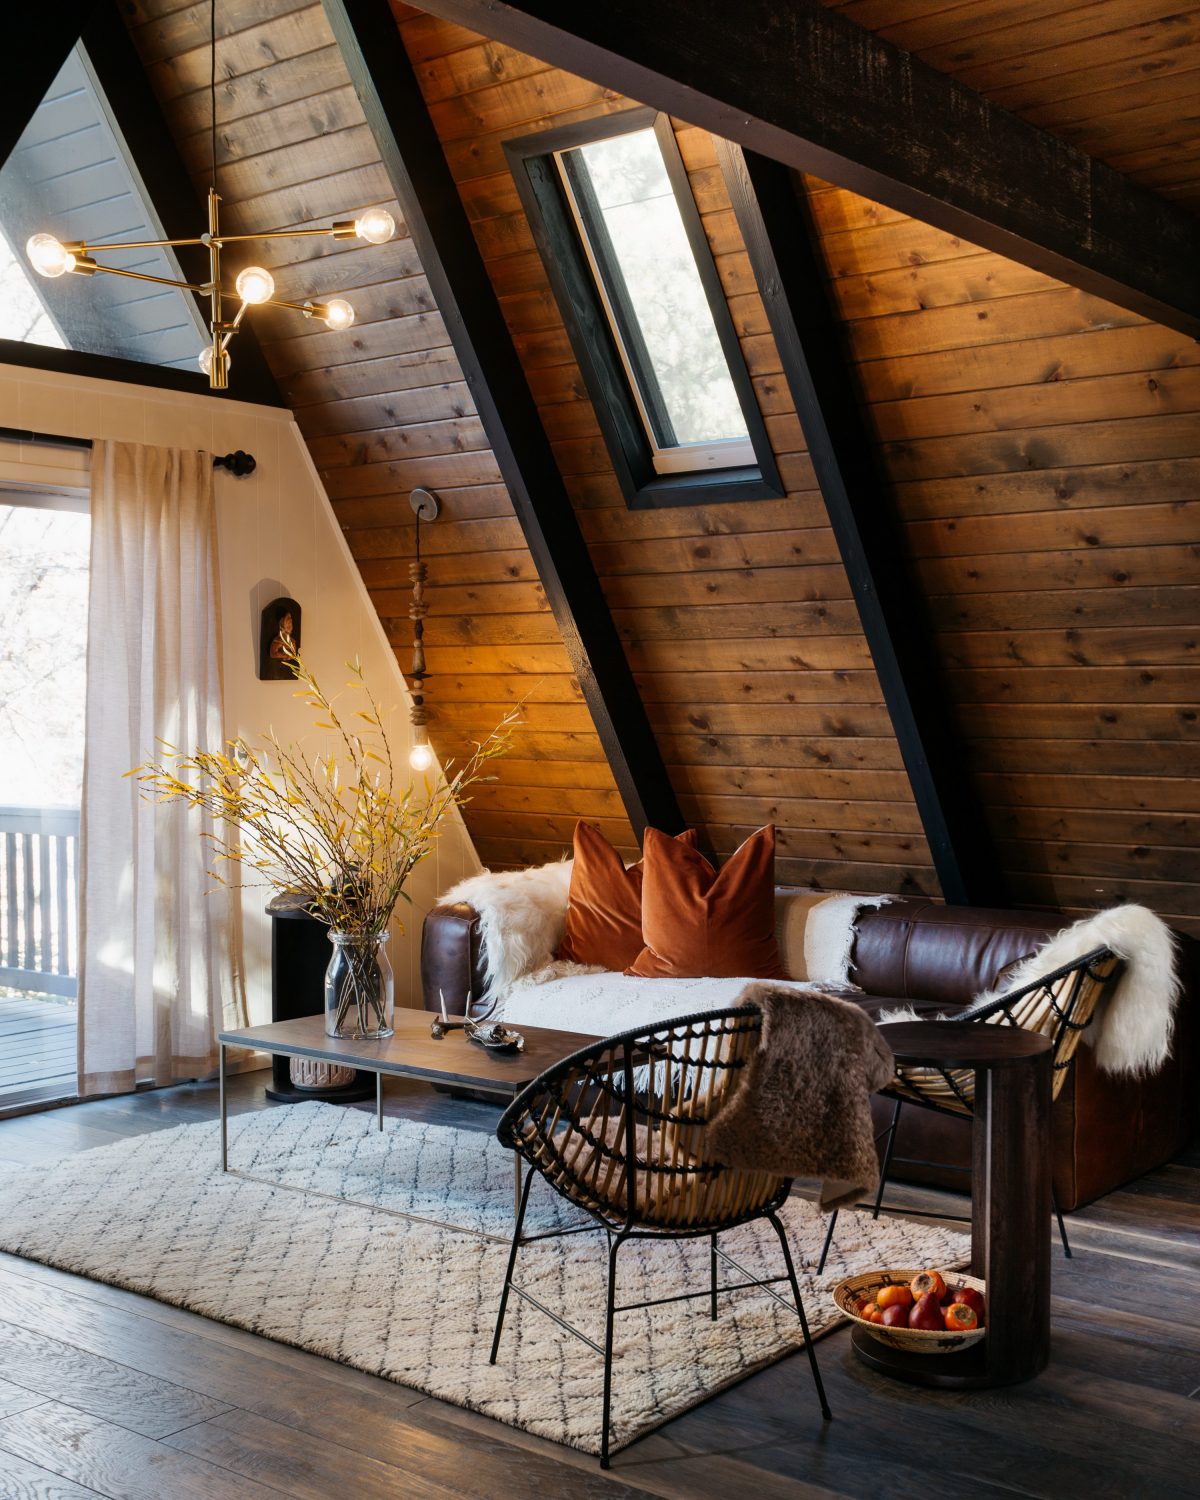 Courtney Poulos’ Eclectic A-Frame House